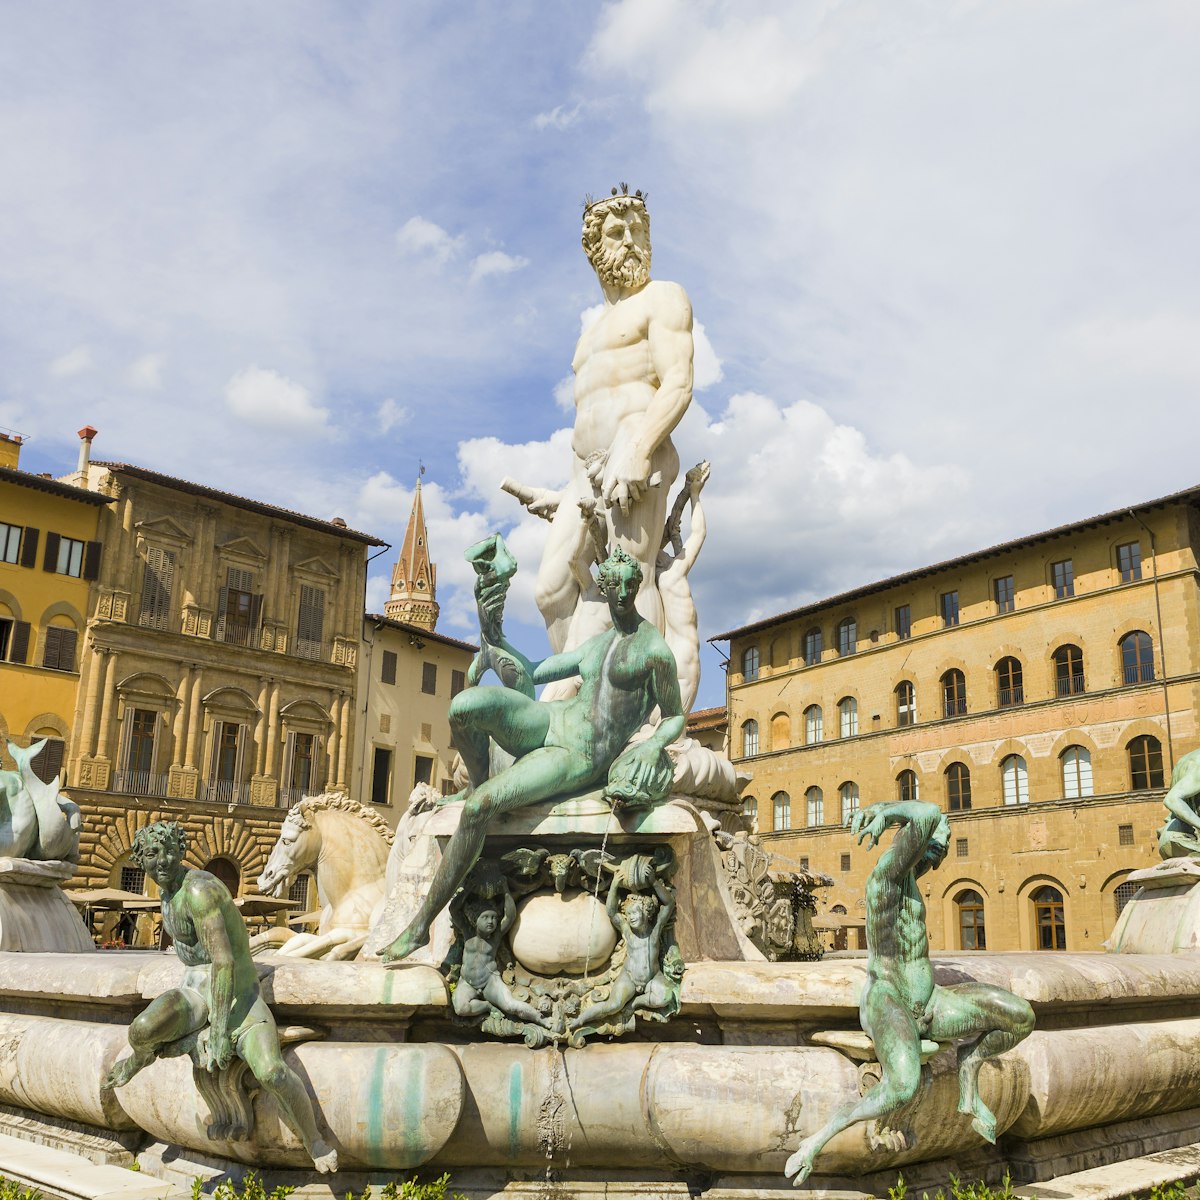 181138450
Architecture; Art; Art And Craft; Arts; Italian Culture; Italy; Town Square; Travel; Travel Destinations; Color Image; Famous Place; Florence - Italy; Fountain; Fountain of Neptune; Neptune; Neptune - Roman God; Neptune Fountain - Florence; No People; Piazza Della Signoria; Roman; Craft; Cultures; Day; Europe; Horizontal; Photography; Statue;
Fountain of Neptune, Piazza Della Signoria, Florence, Italy.